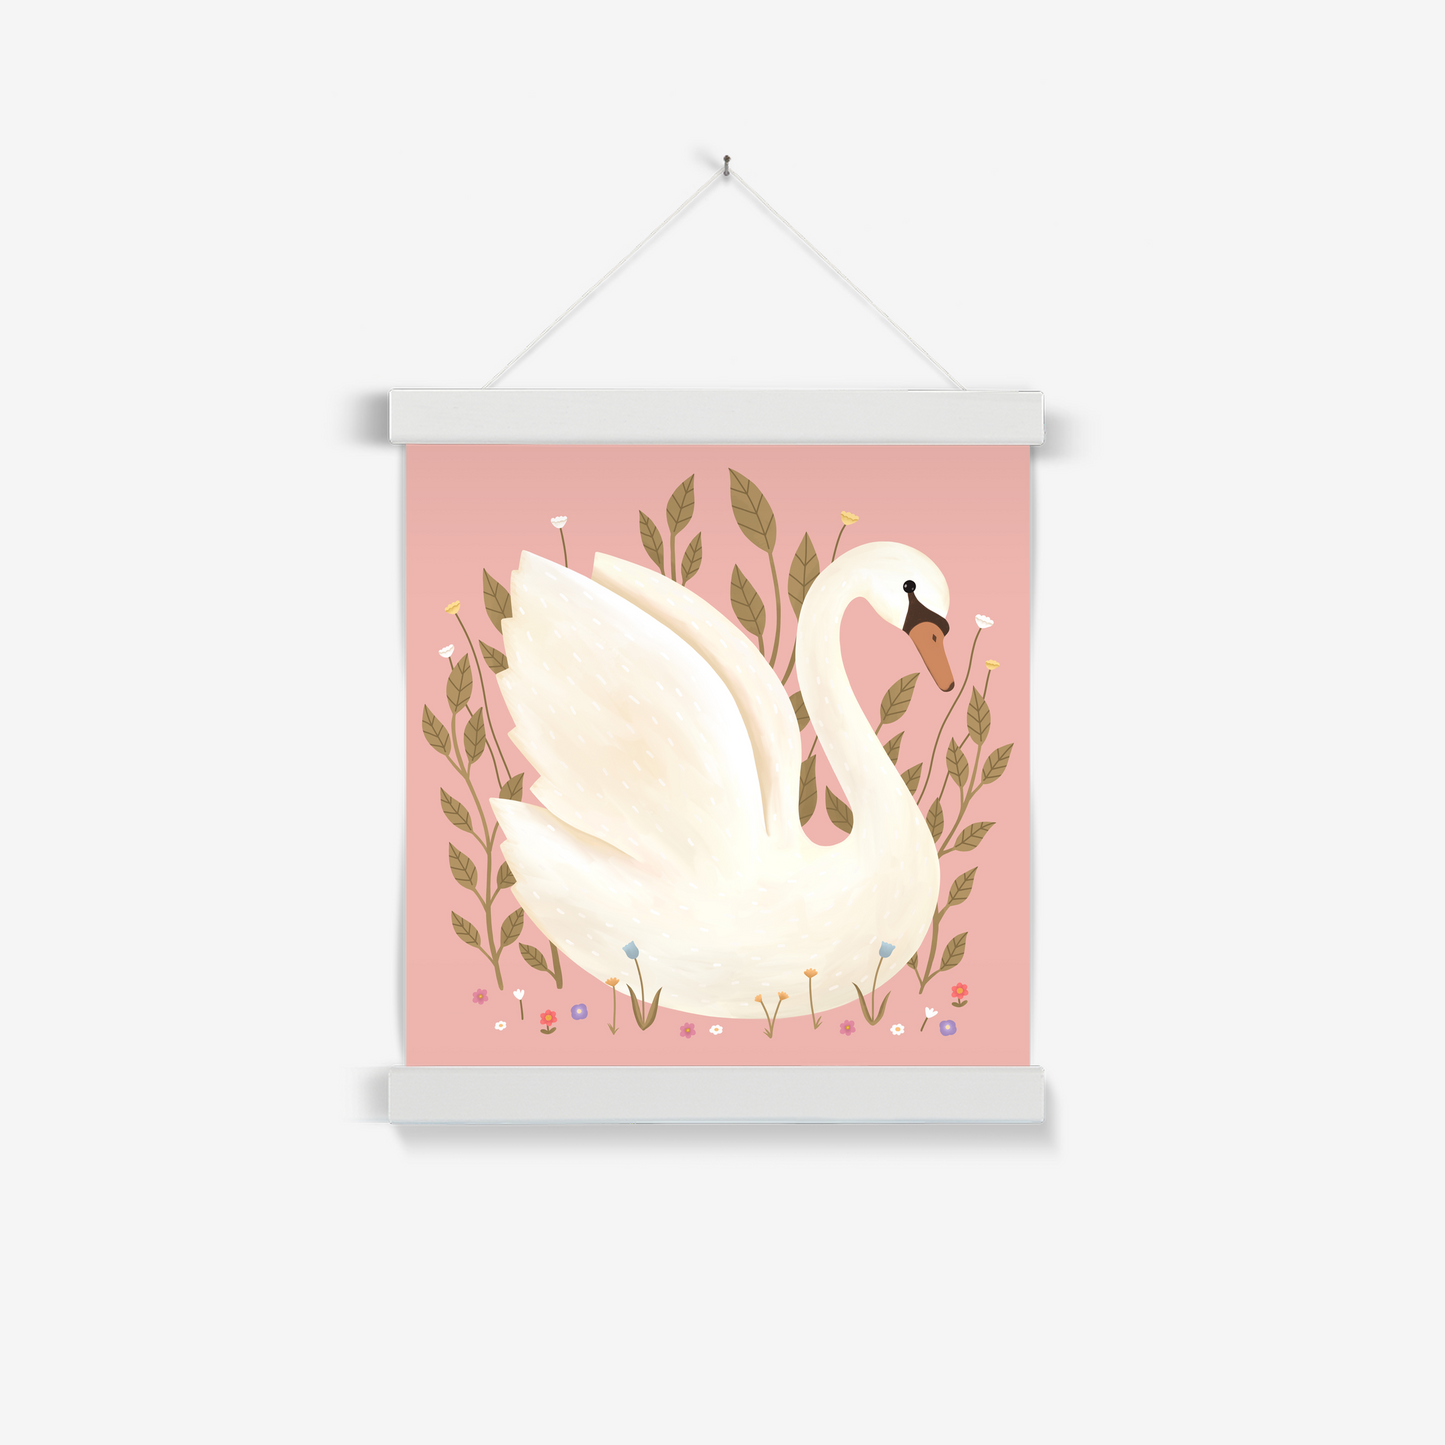 Swan in pink / Print with Hanger